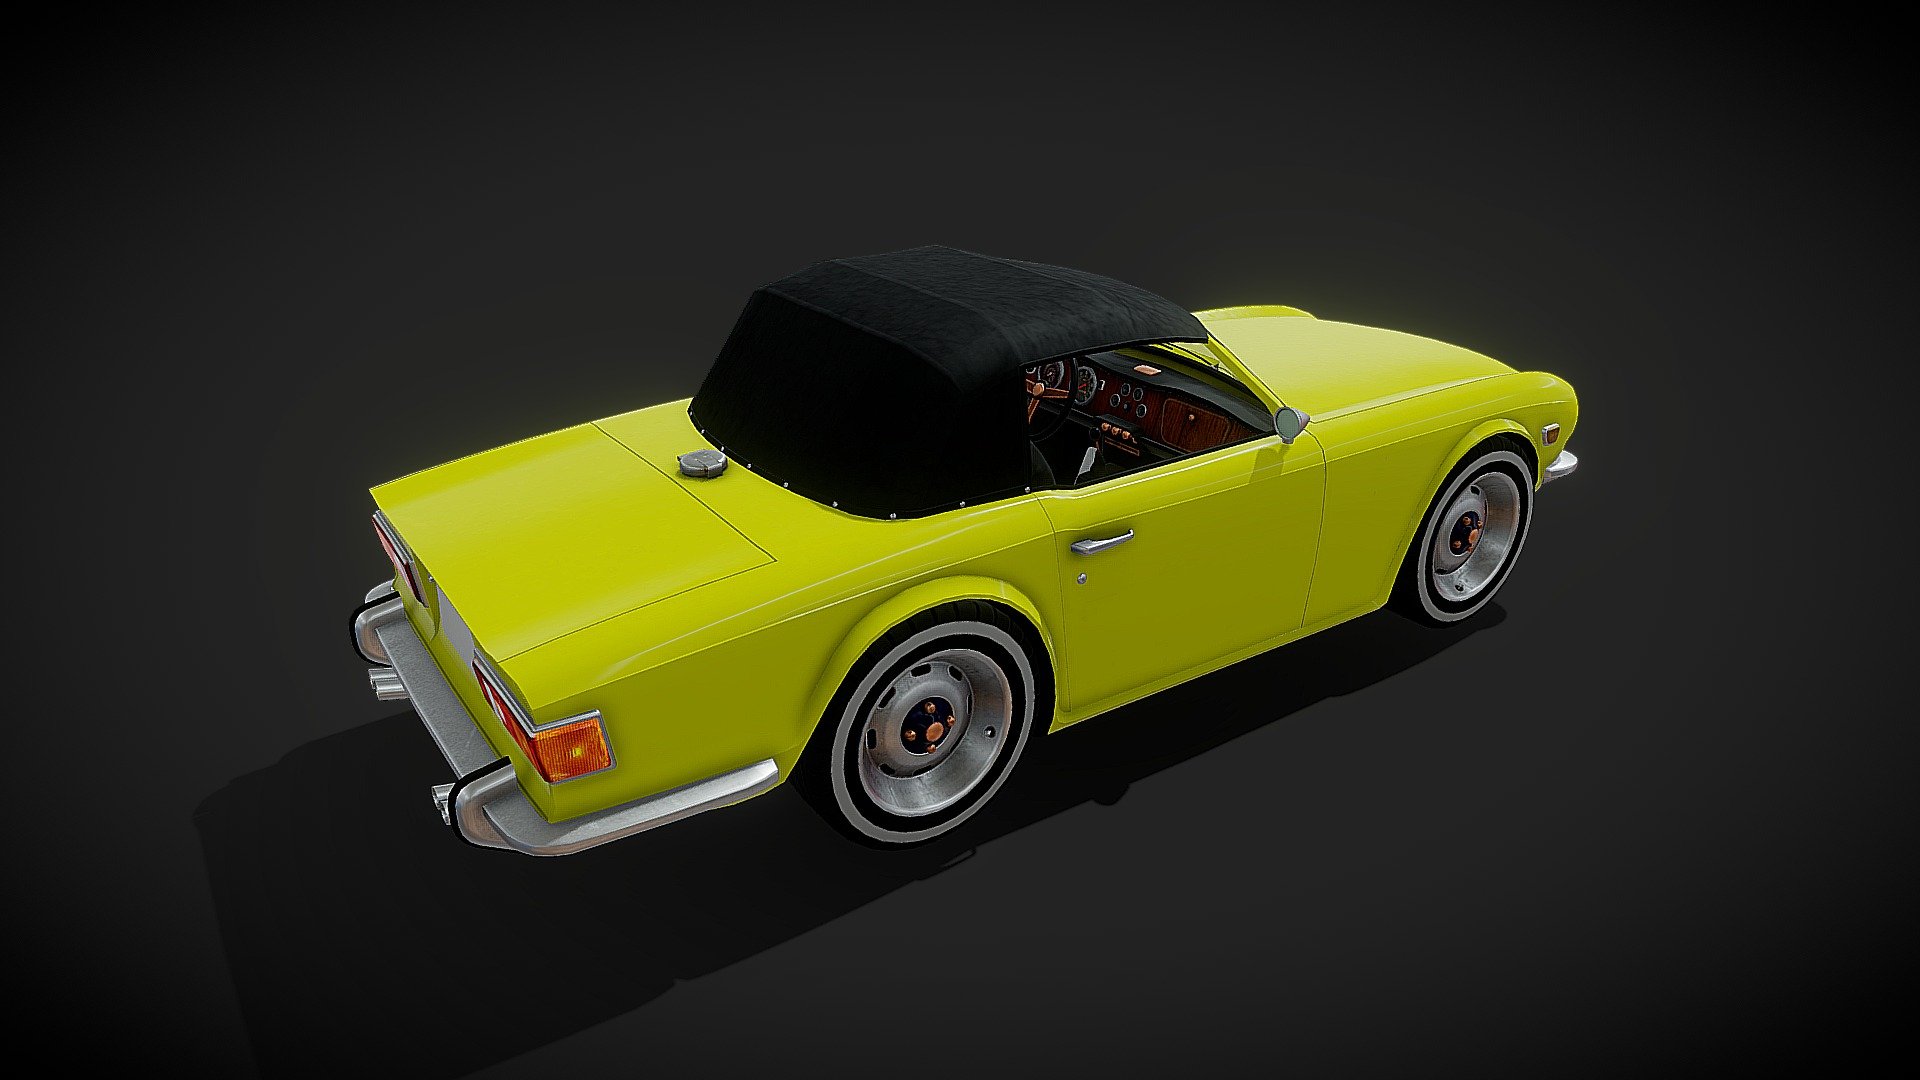 Lowpoly 3D model ,,Triumph TR-6,,. Textures include five different colors.
The Triumph TR6 is a sports car that was built by the Triumph Motor Company of England 3d model